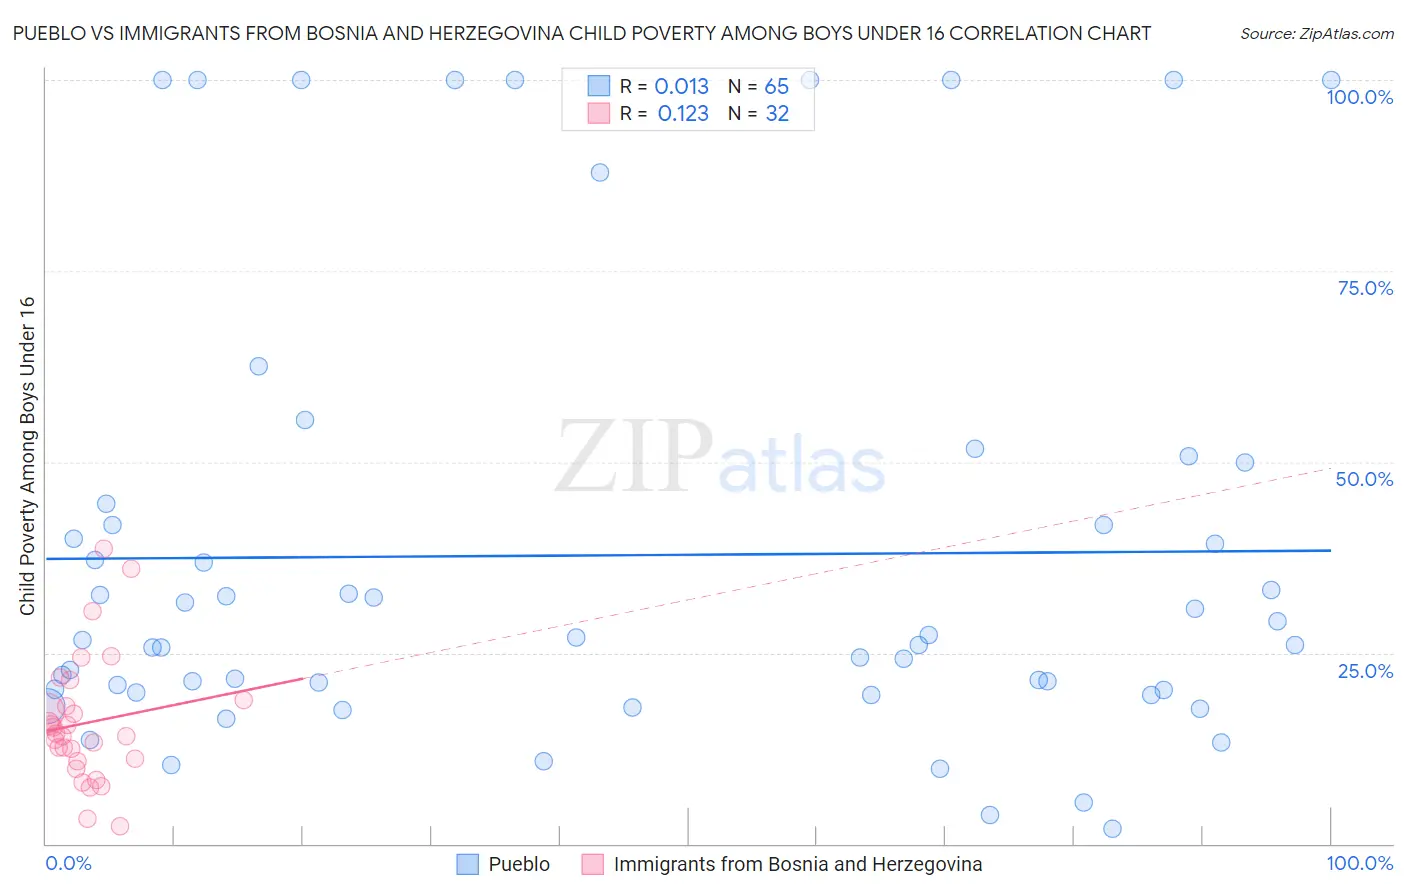 Pueblo vs Immigrants from Bosnia and Herzegovina Child Poverty Among Boys Under 16